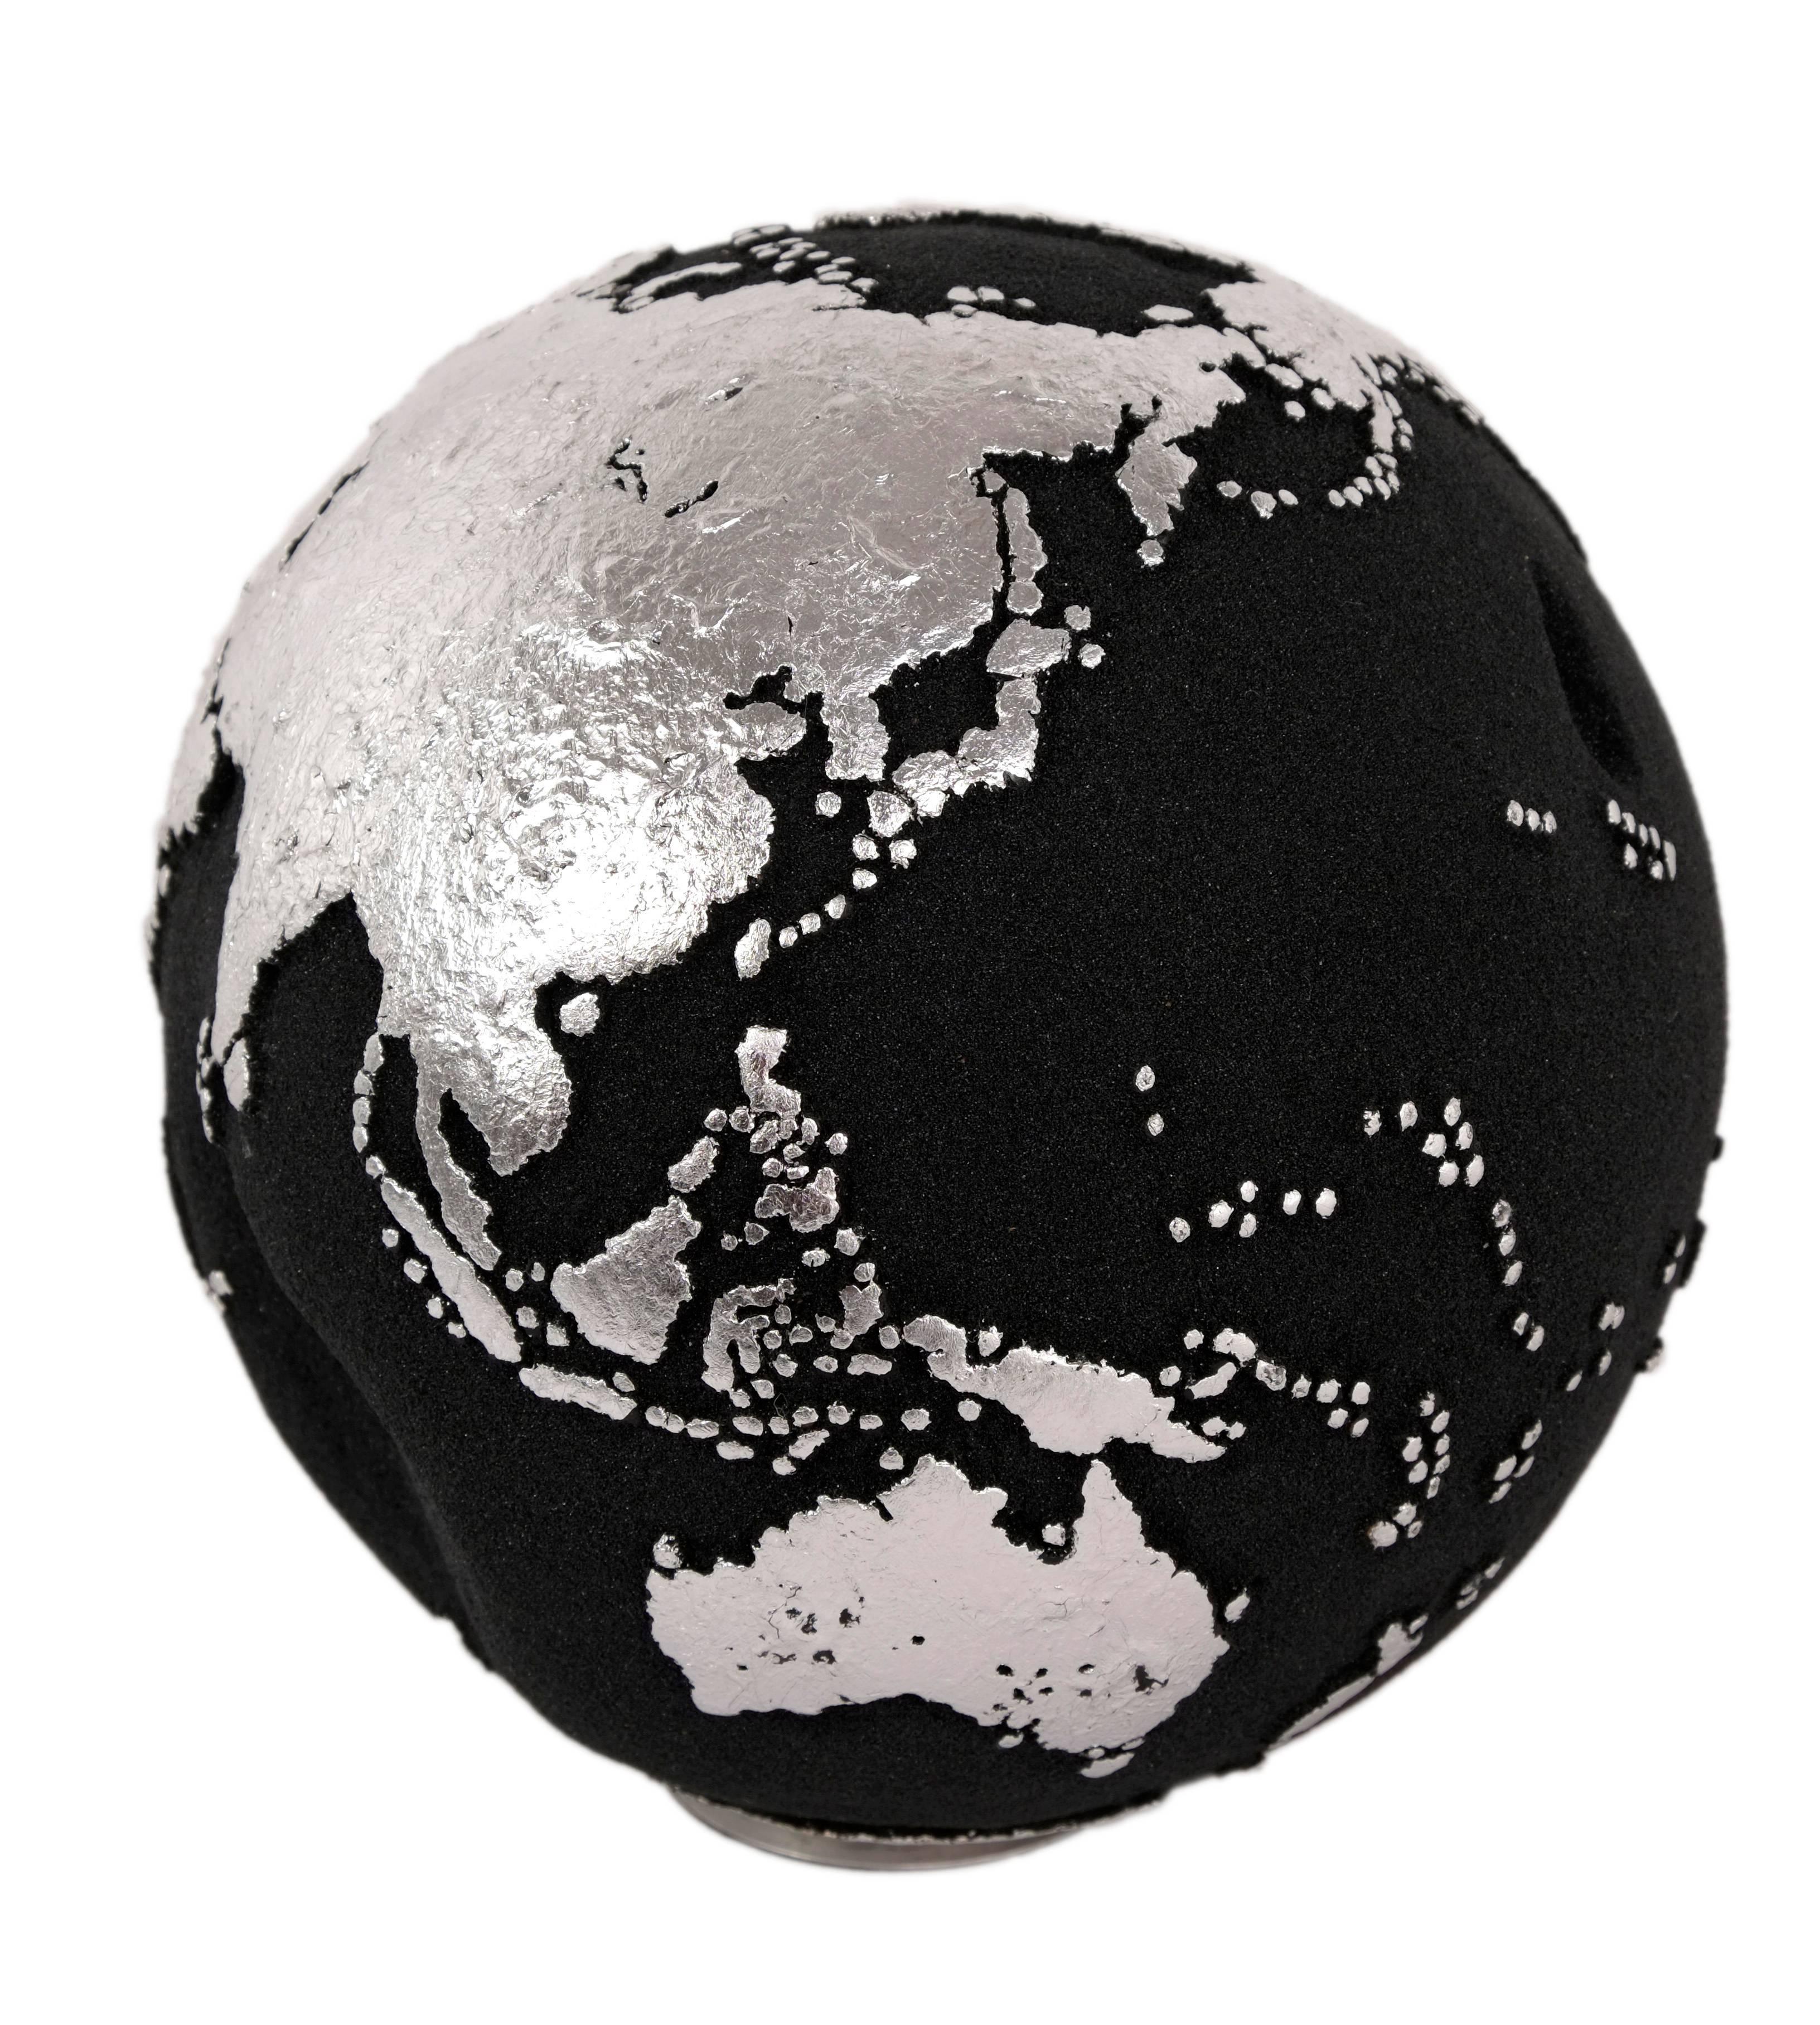 Organic Modern Classic Globe with Volcanic Sand and Silver Finishing, 20 cm